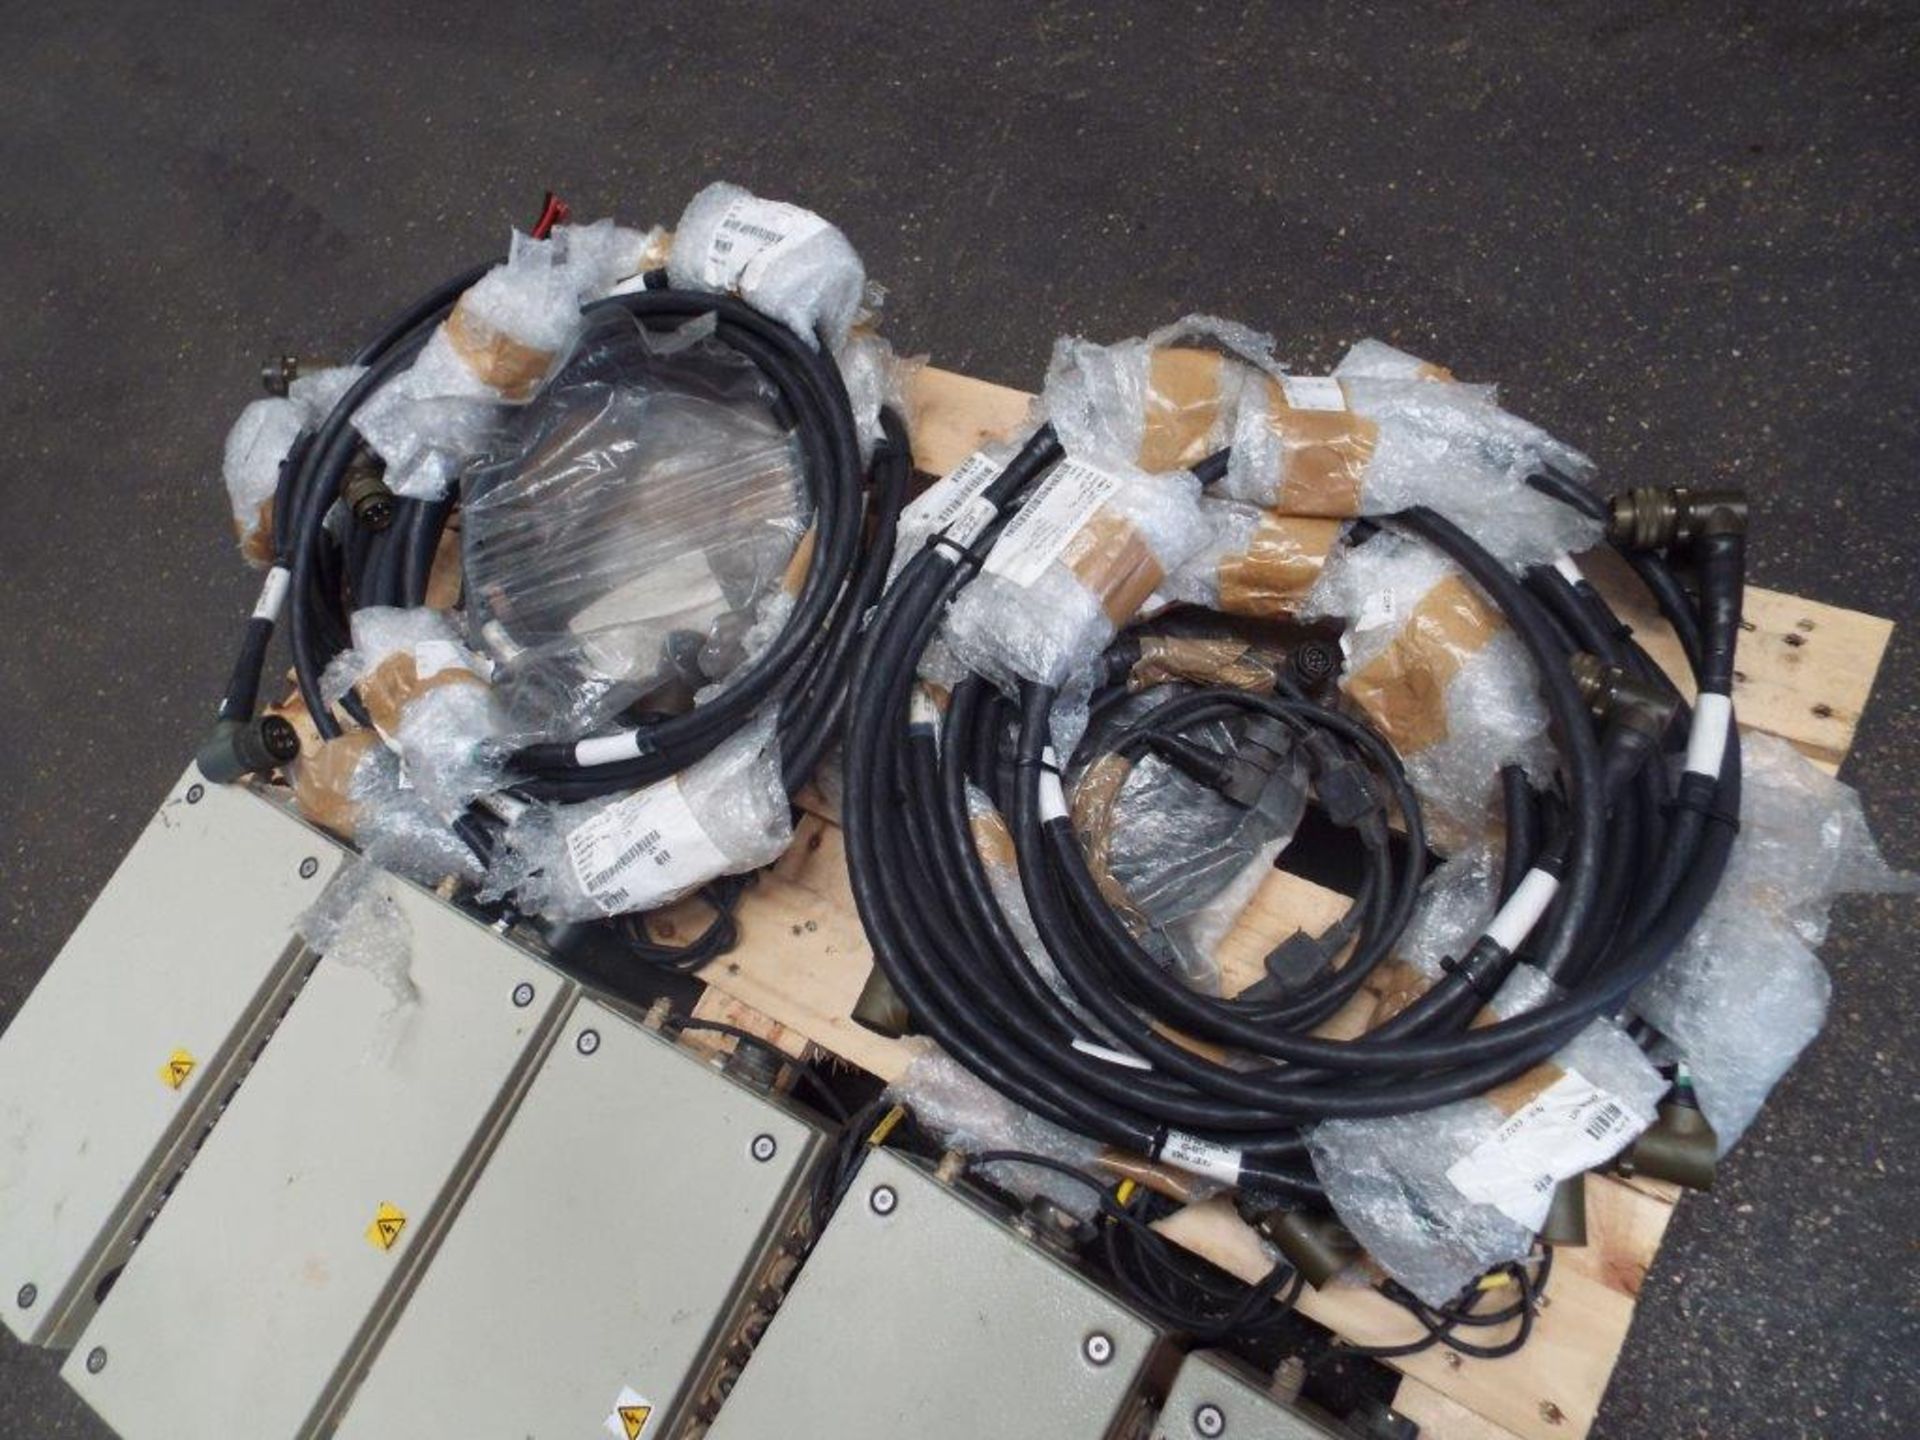 5 x Land Rover Snatch Power Distribution Boxes c/w Cables - Image 4 of 5